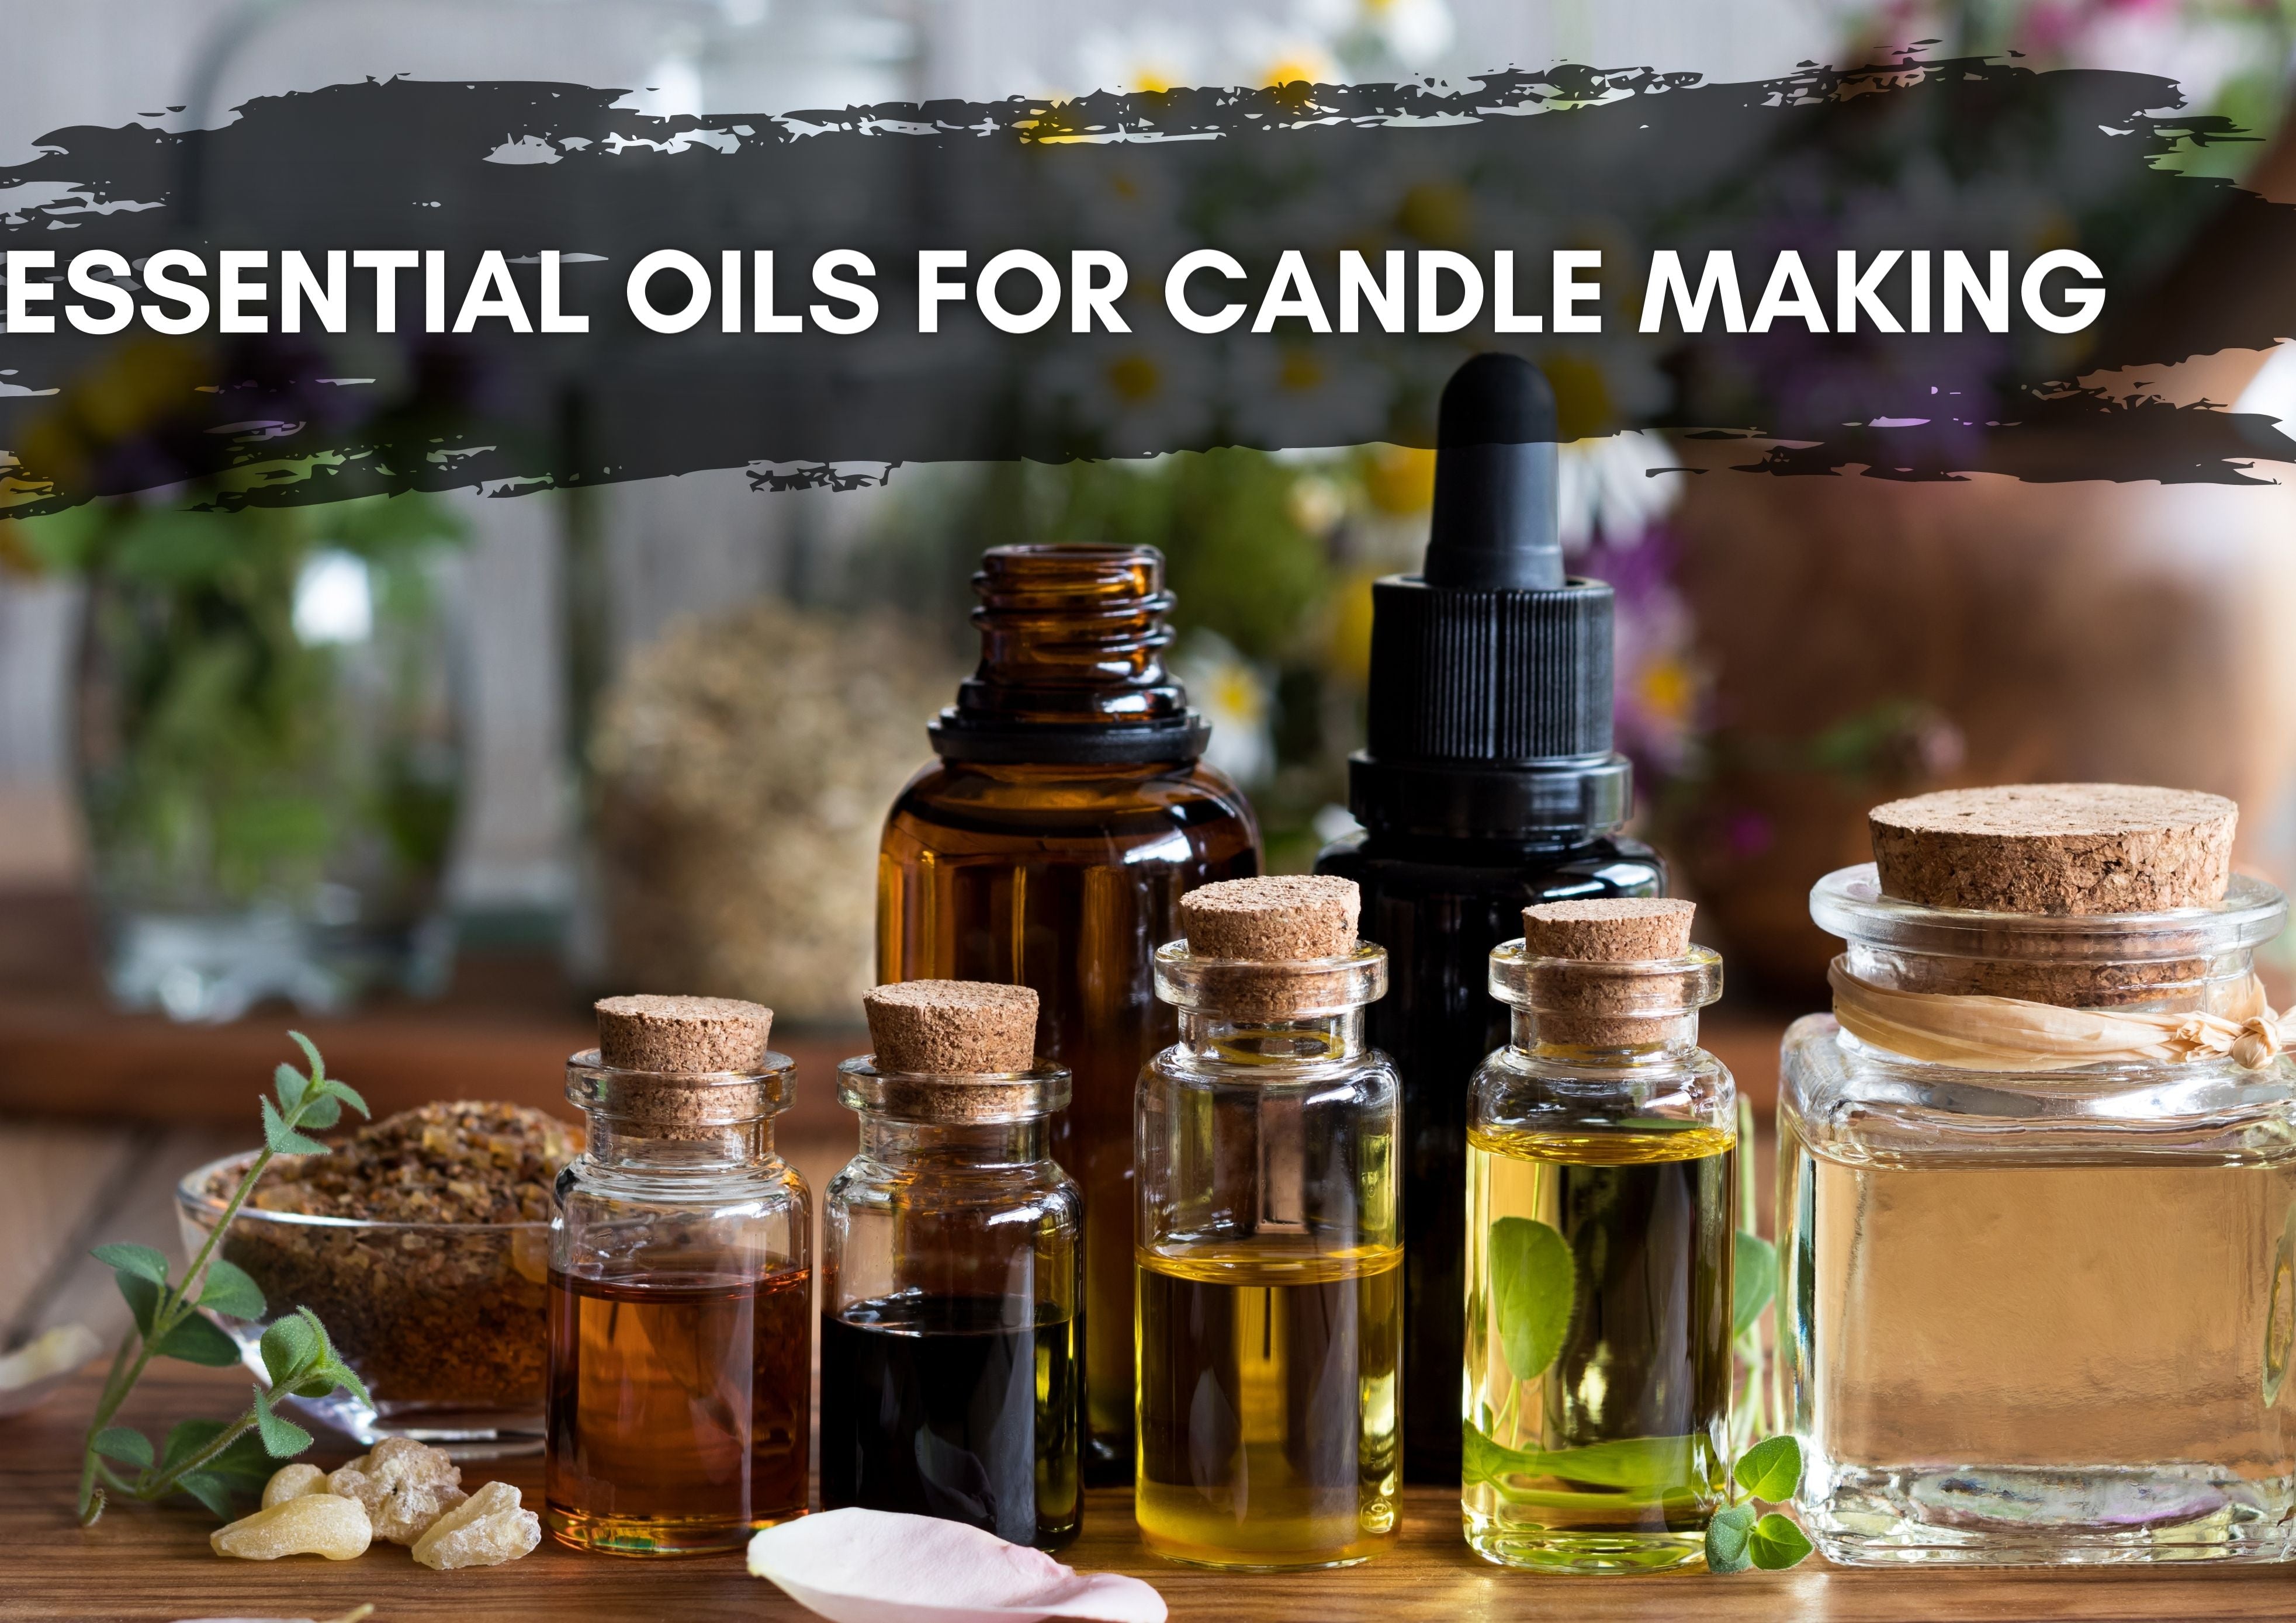 Essential oils for candle making – Suffolk Candles